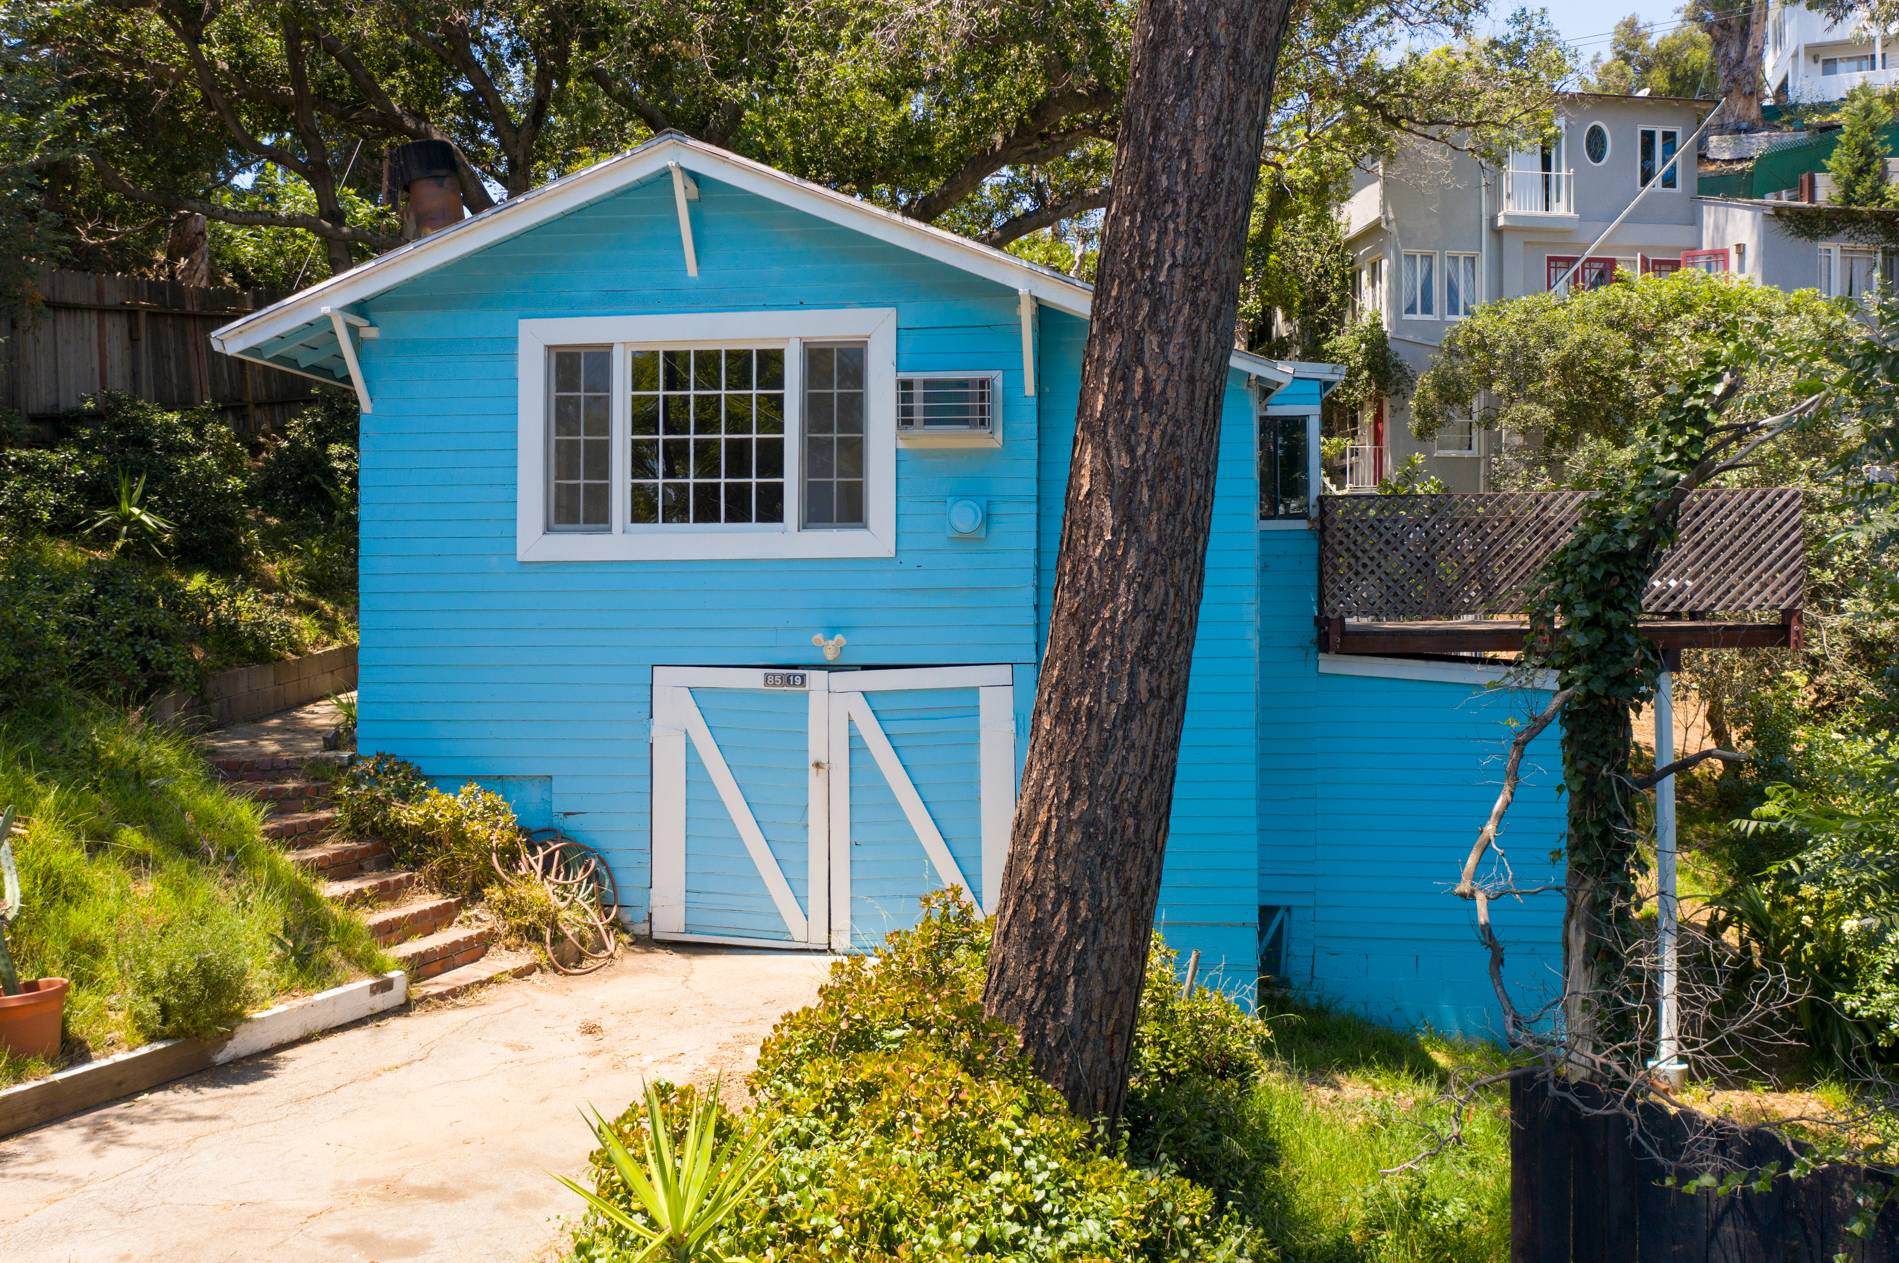 Charming rustic  1 BR Artist Retreat in Historic Laurel Canyon! Views, jacuzzi, Parking! Must see!